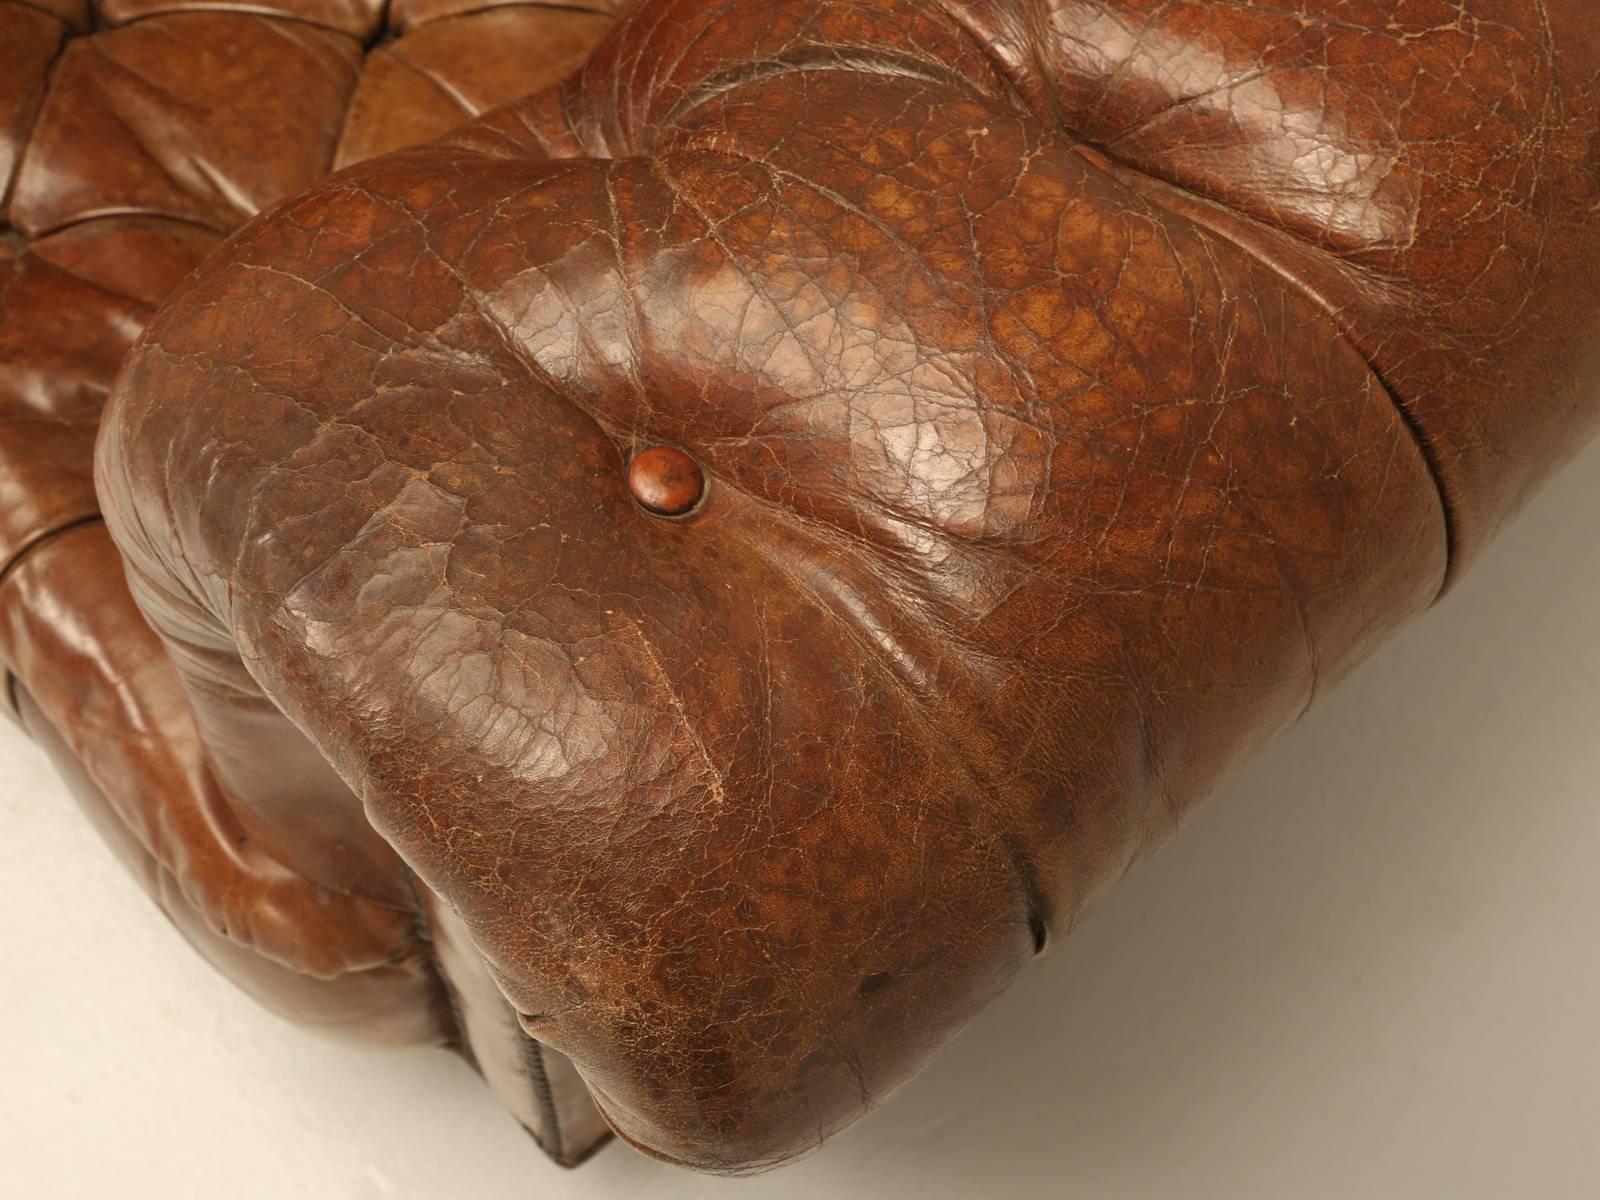 chesterfield chair leather